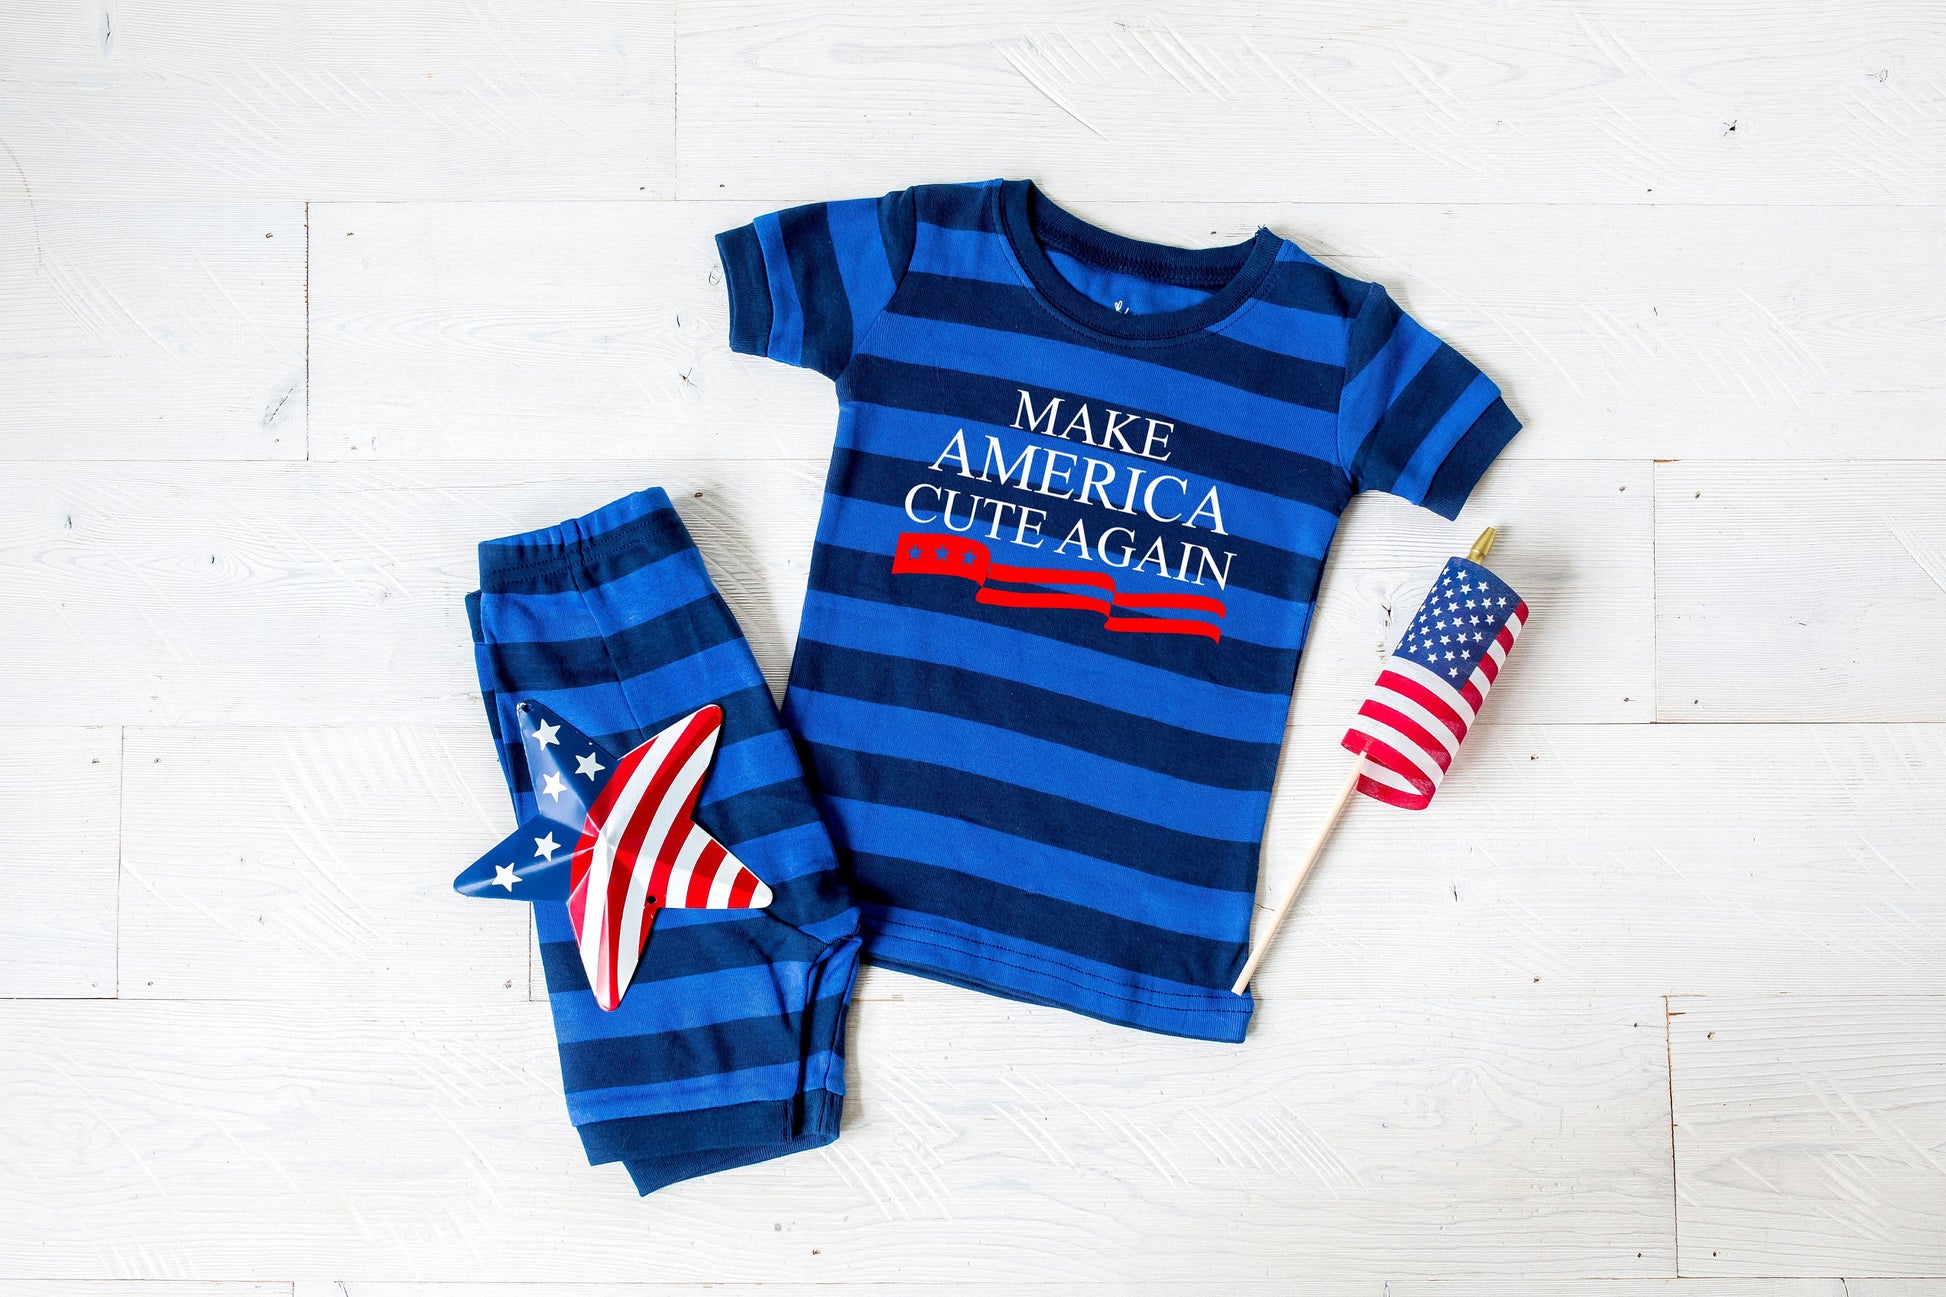 Make America Cute Again Blue Striped Shorts Toddler and Youth Pajamas - Political Pajamas - Right Wing - Republican Kids Clothes